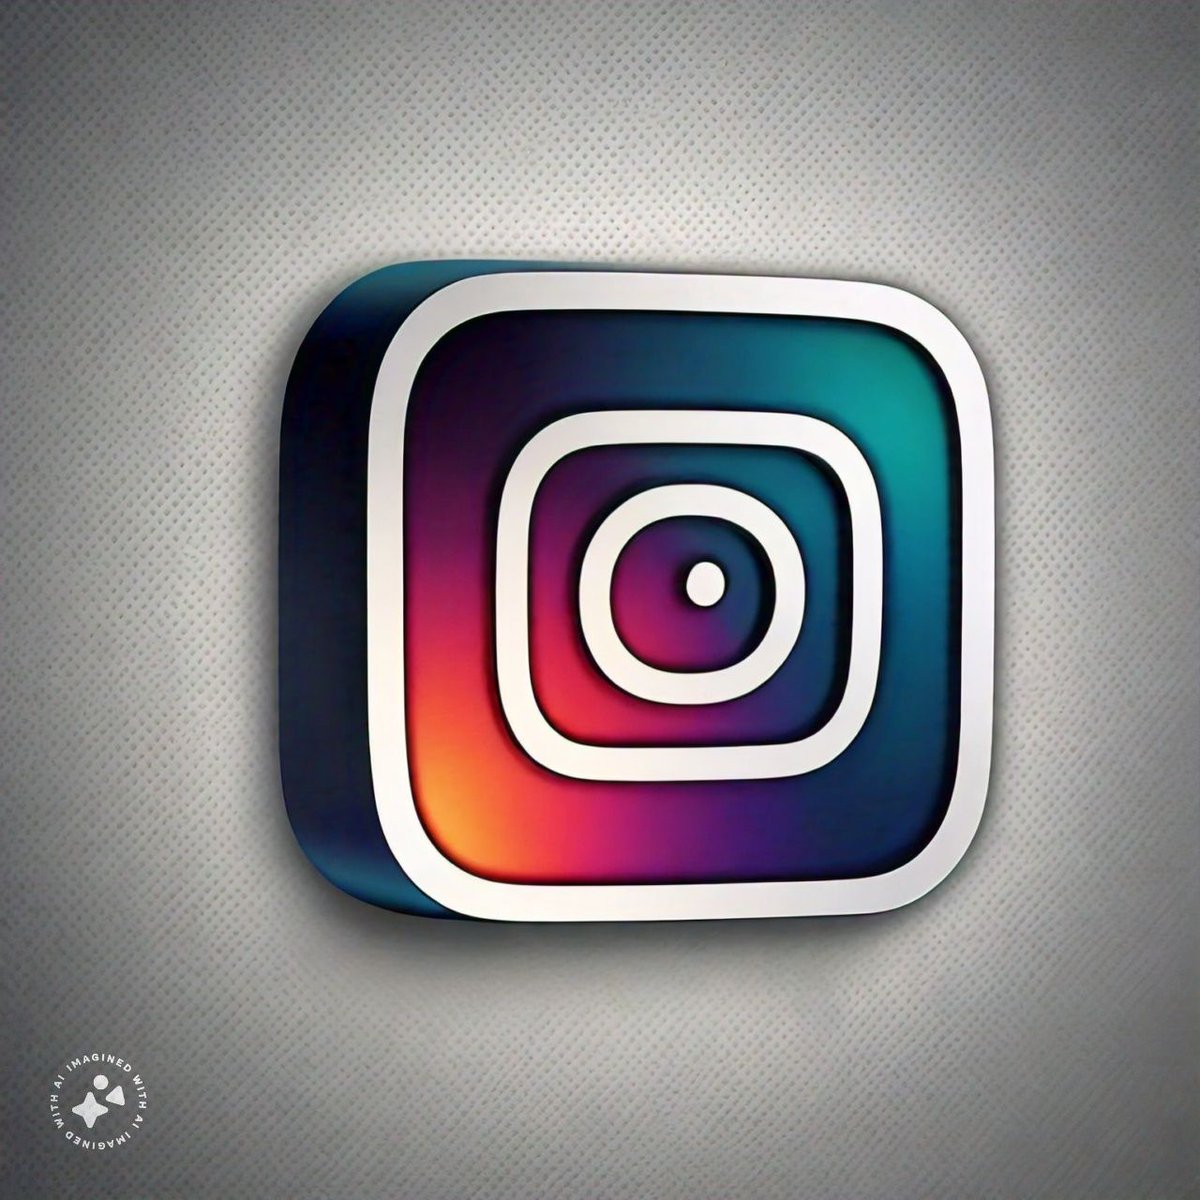 #instagram is a #Social_Media  platform primarily focused on visual content like #PHOTOS and #VIDEOS. Its uses vary widely, from personal expression and communication to #BusinessStrategy marketing and #brandidentity. Individuals use Instagram to share moments of their lives,